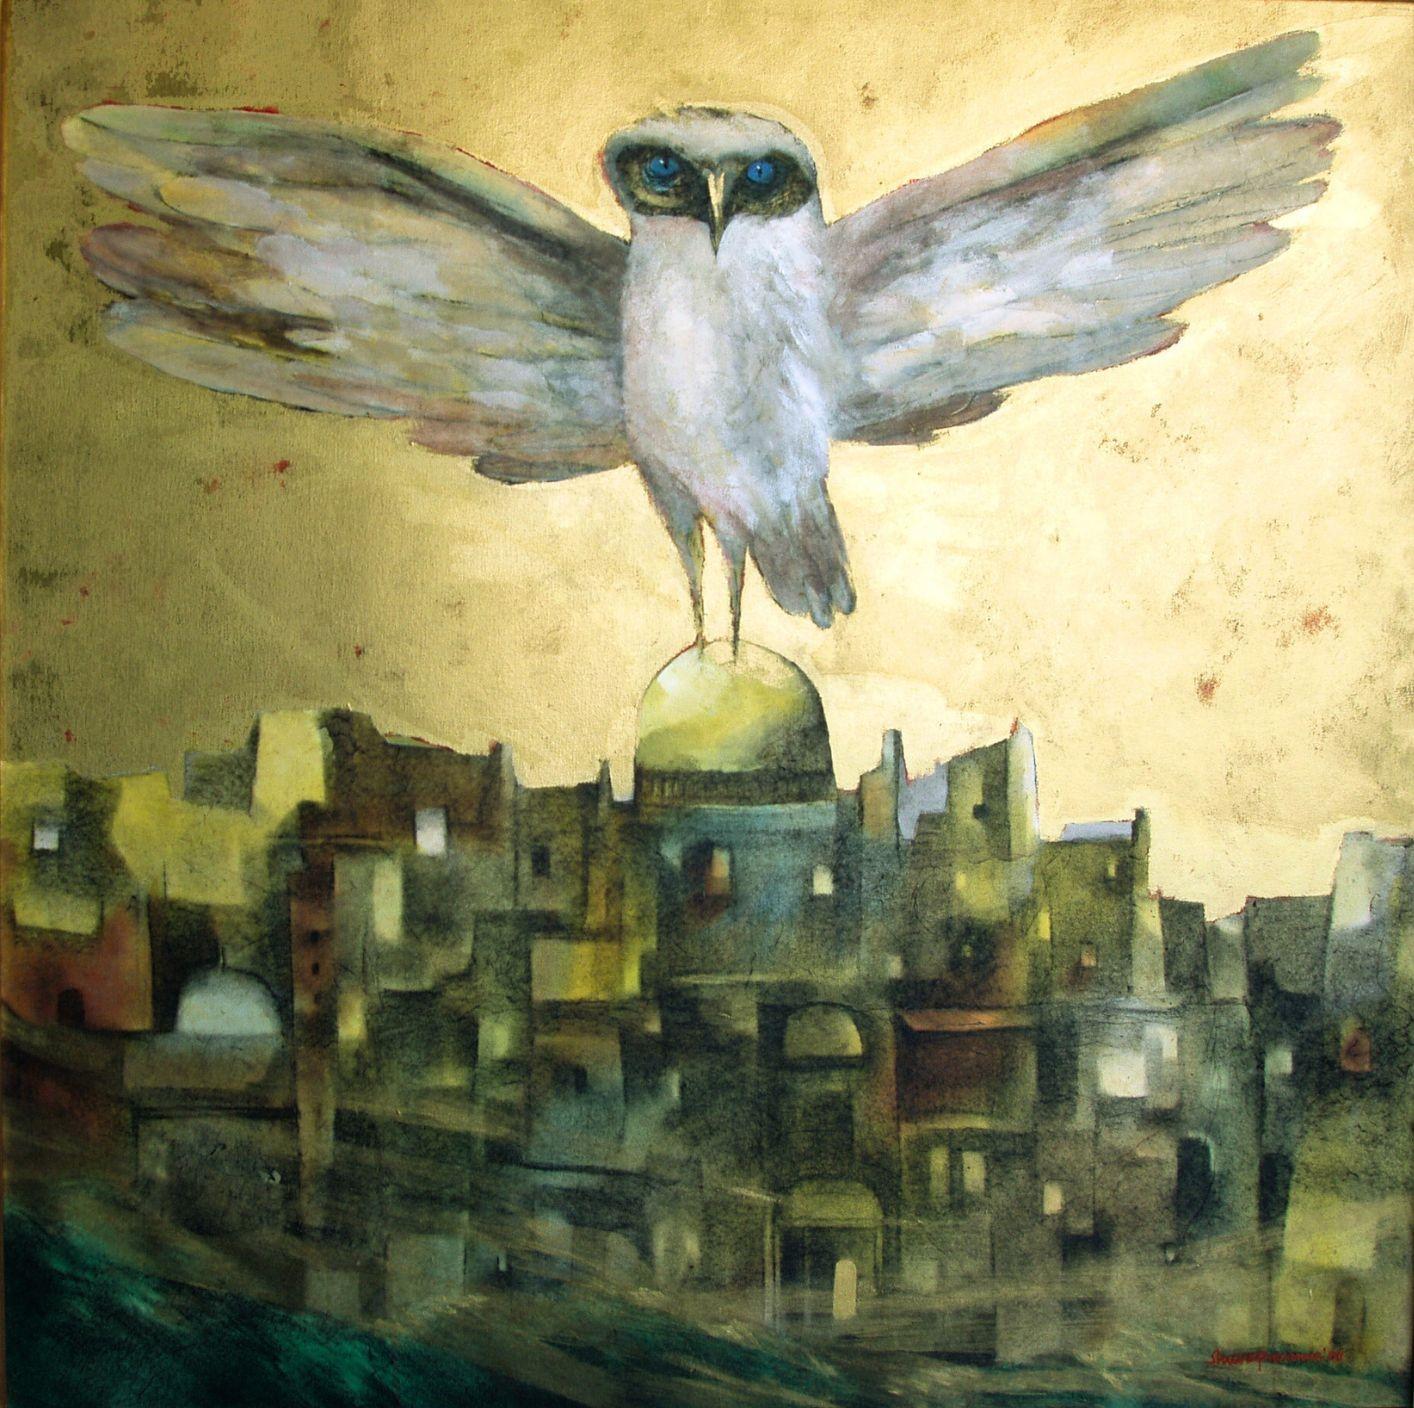 Shuvaprasanna Bhattacharya Interior Painting - The Owl, Acrylic & Charcoal on Canvas by Modern Indian Artist “In Stock”